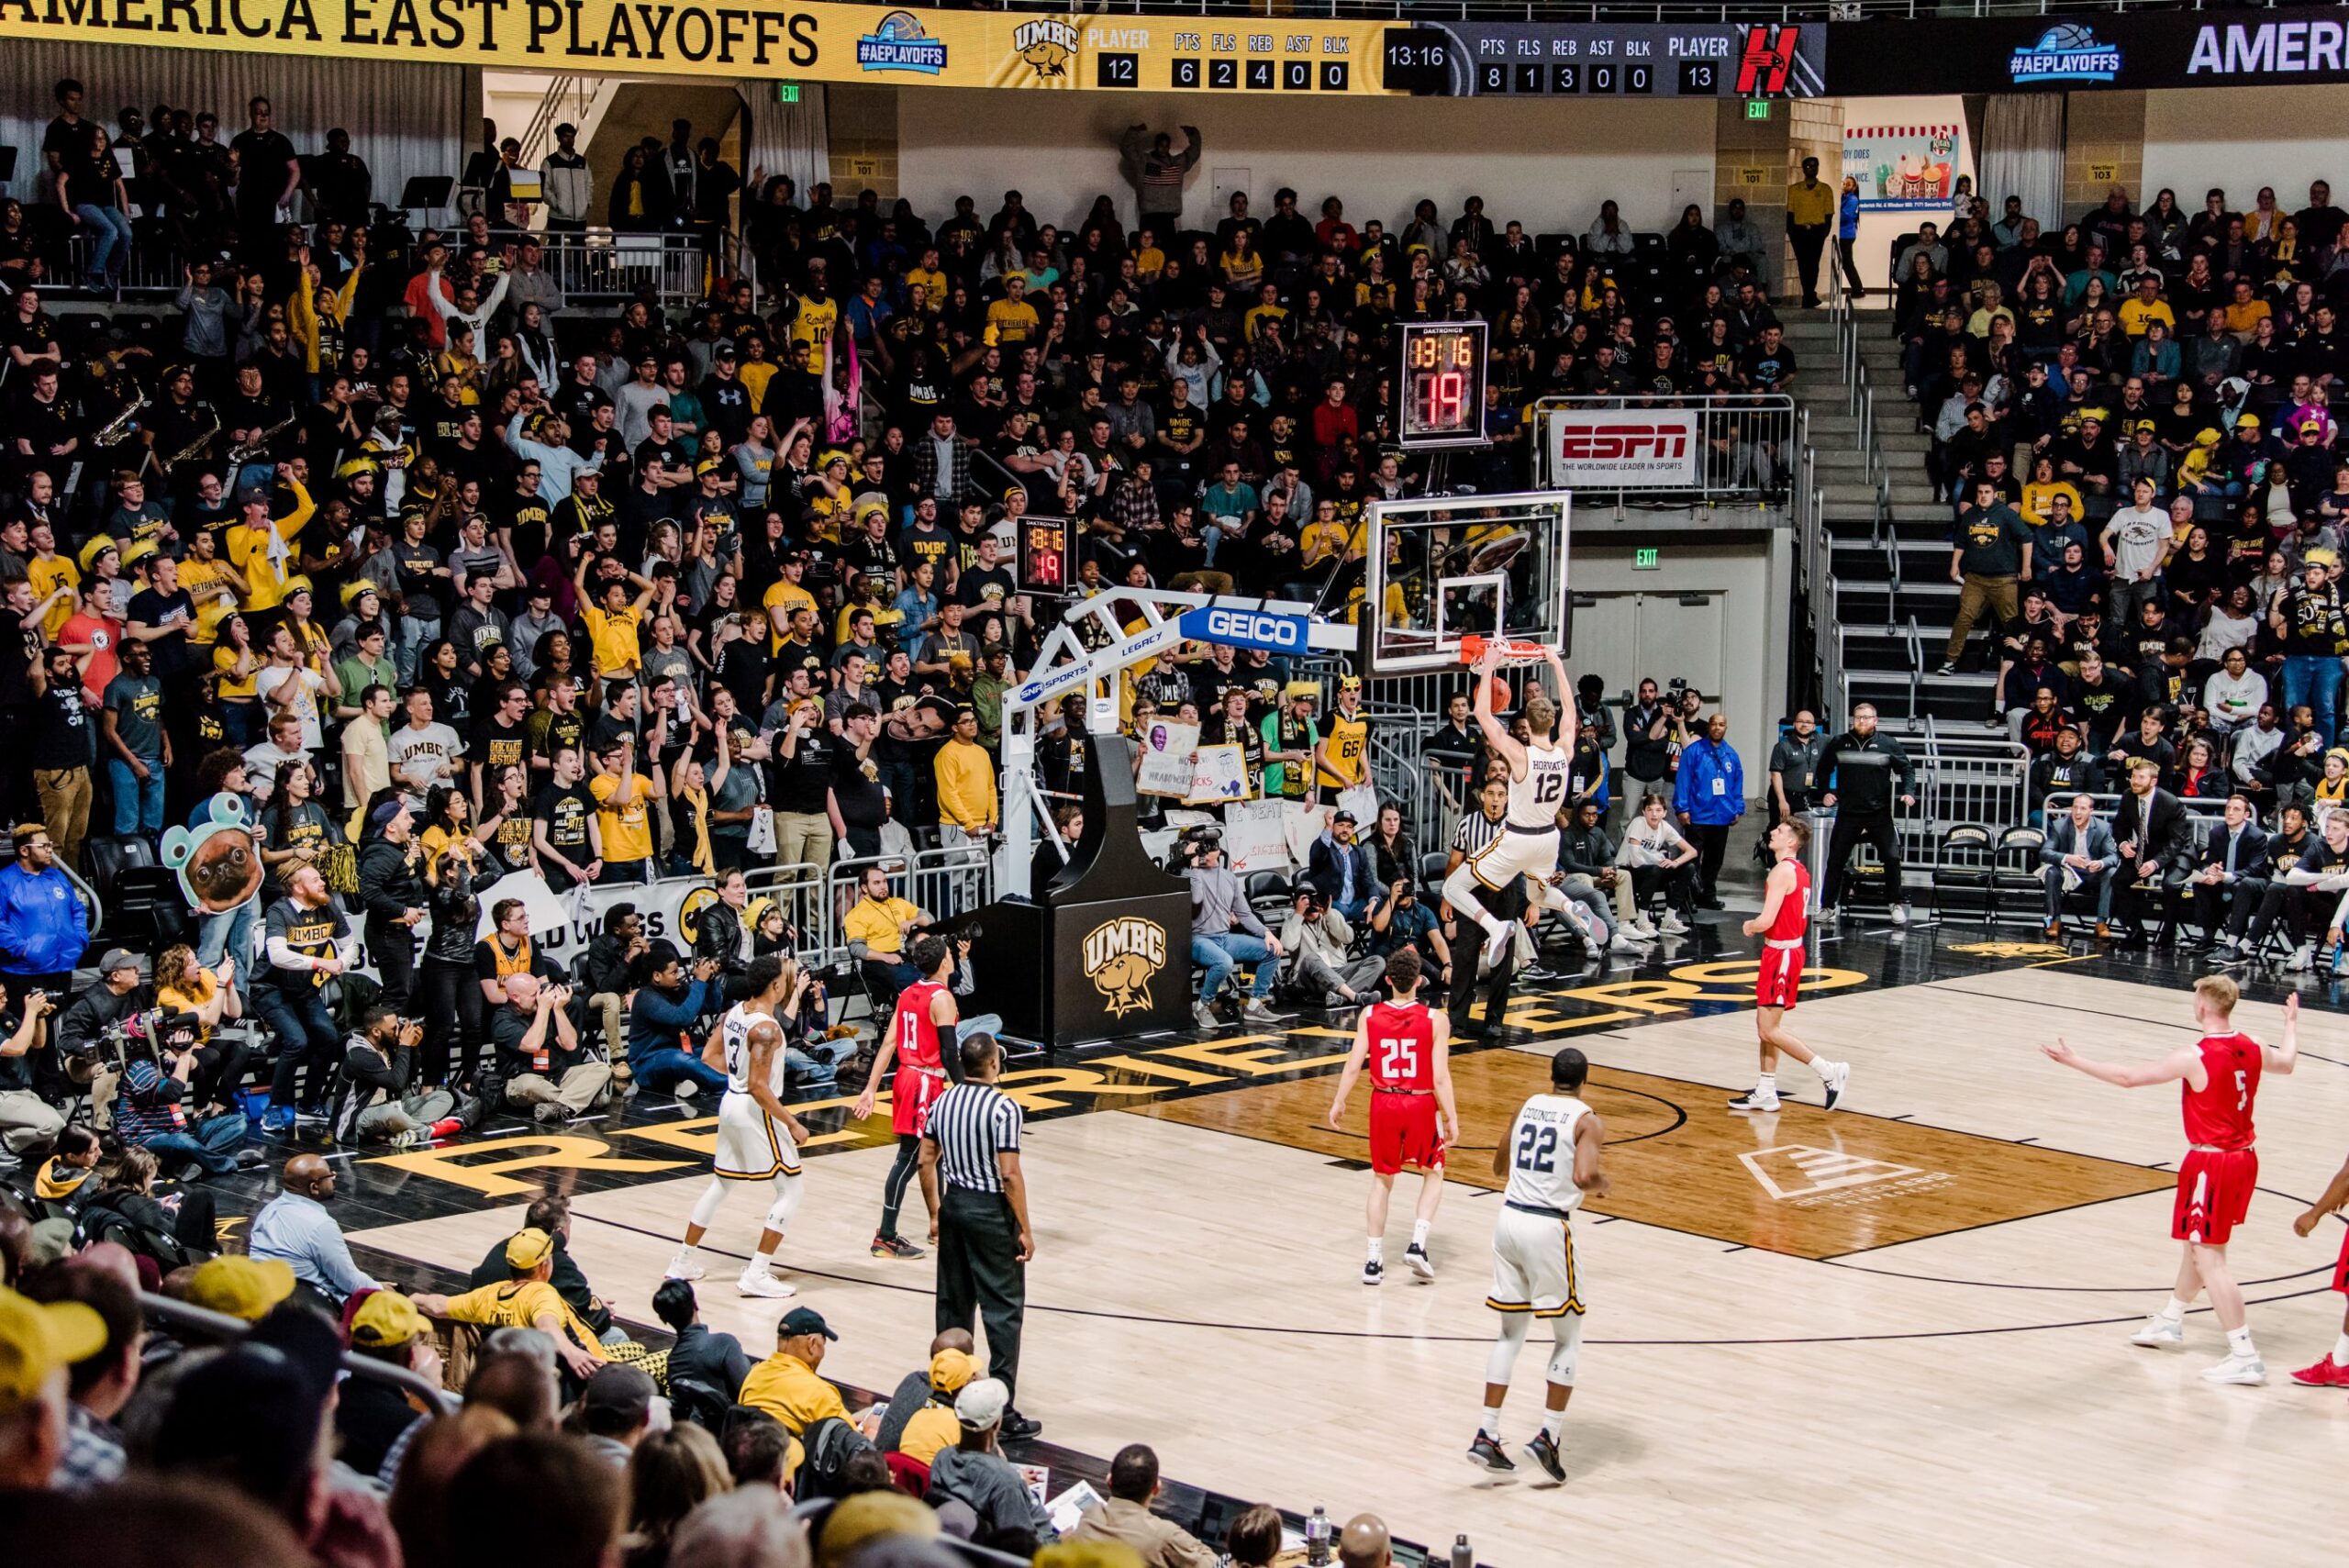 UMBC men’s basketball advances to the America East final after a gripping semifinal victory